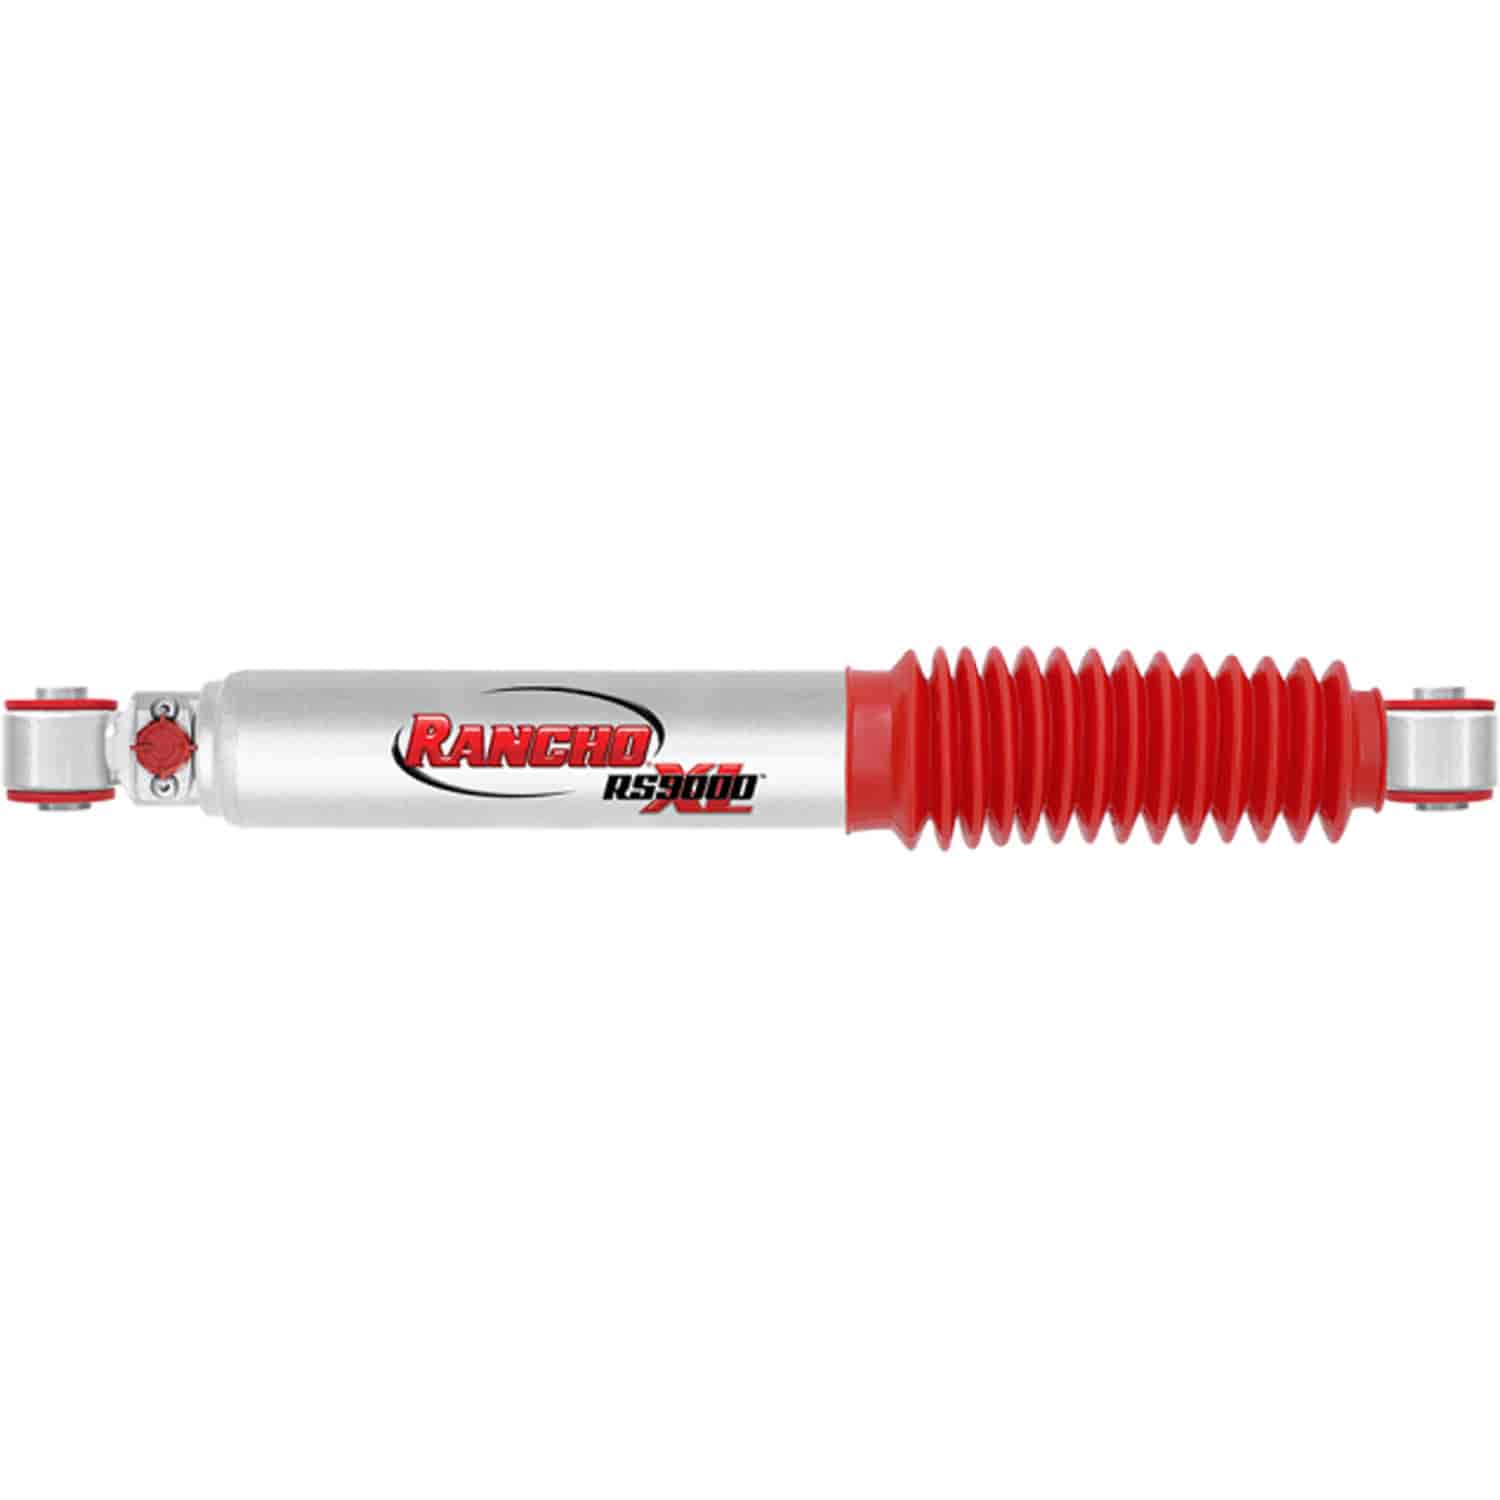 RS9000XL Rear Shock Absorber Fits Mazda B2600